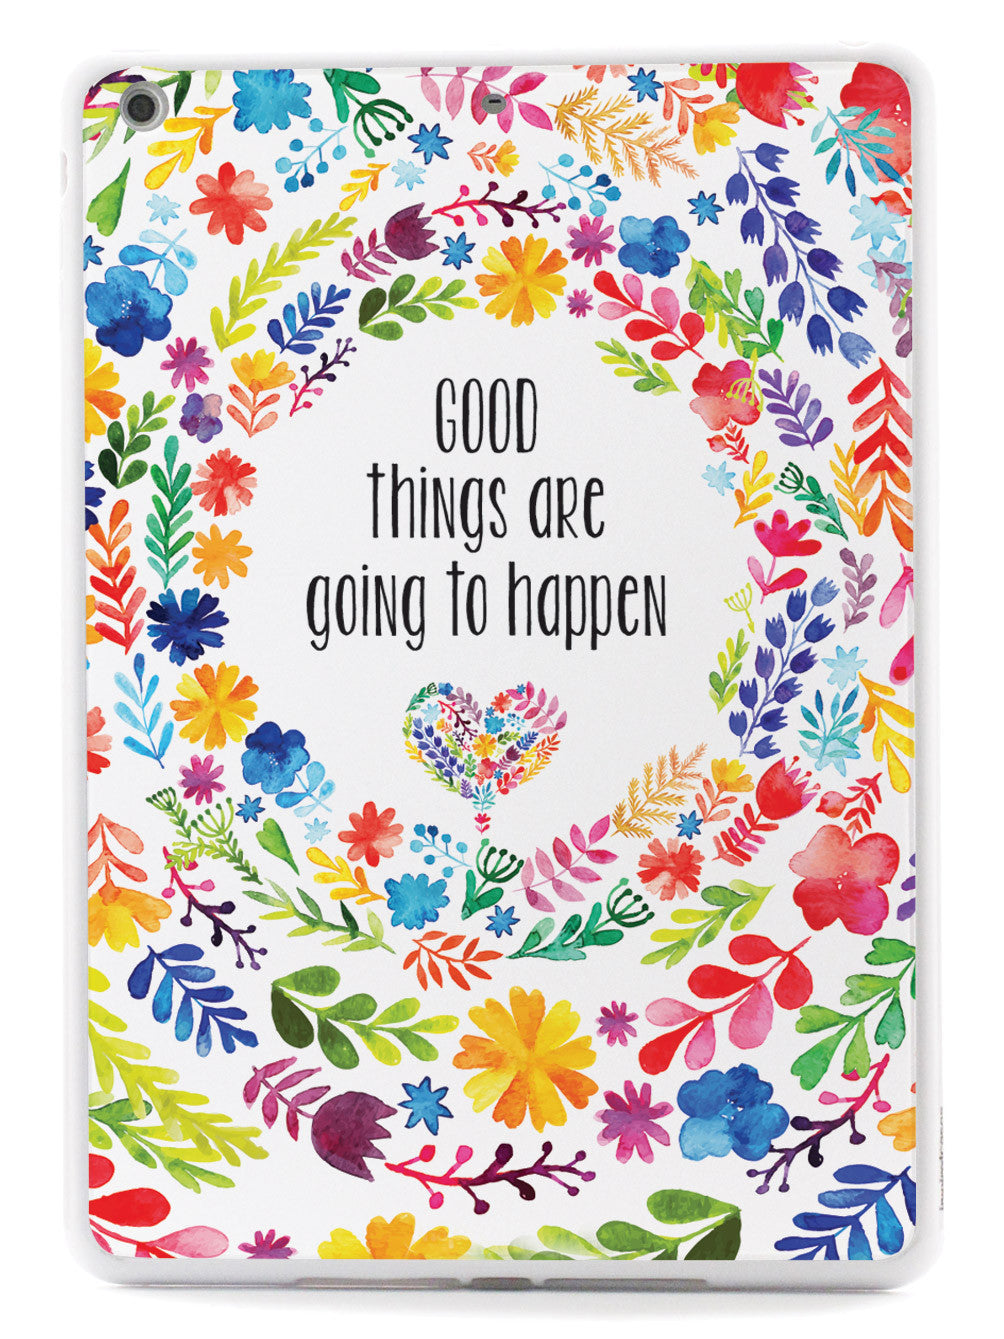 Good Things are Going to Happen Floral Pattern Case